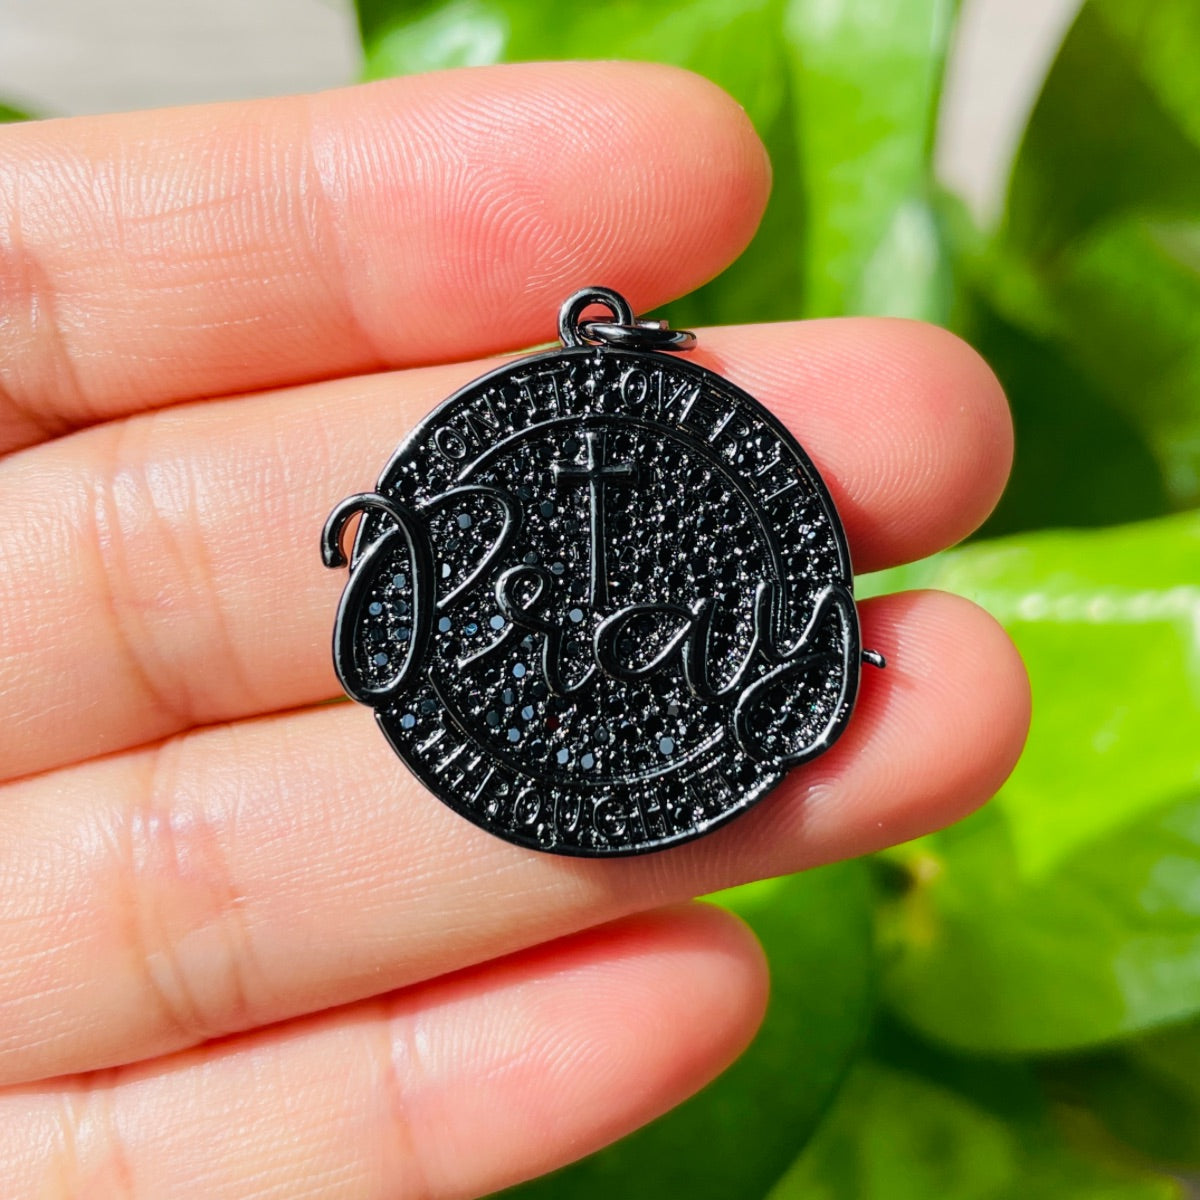 10pcs/lot 28mm CZ Pave Round Plate PRAY ON IT OVER IT THROUGH IT Quote Charms Black on Black CZ Paved Charms Christian Quotes Discs On Sale Charms Beads Beyond